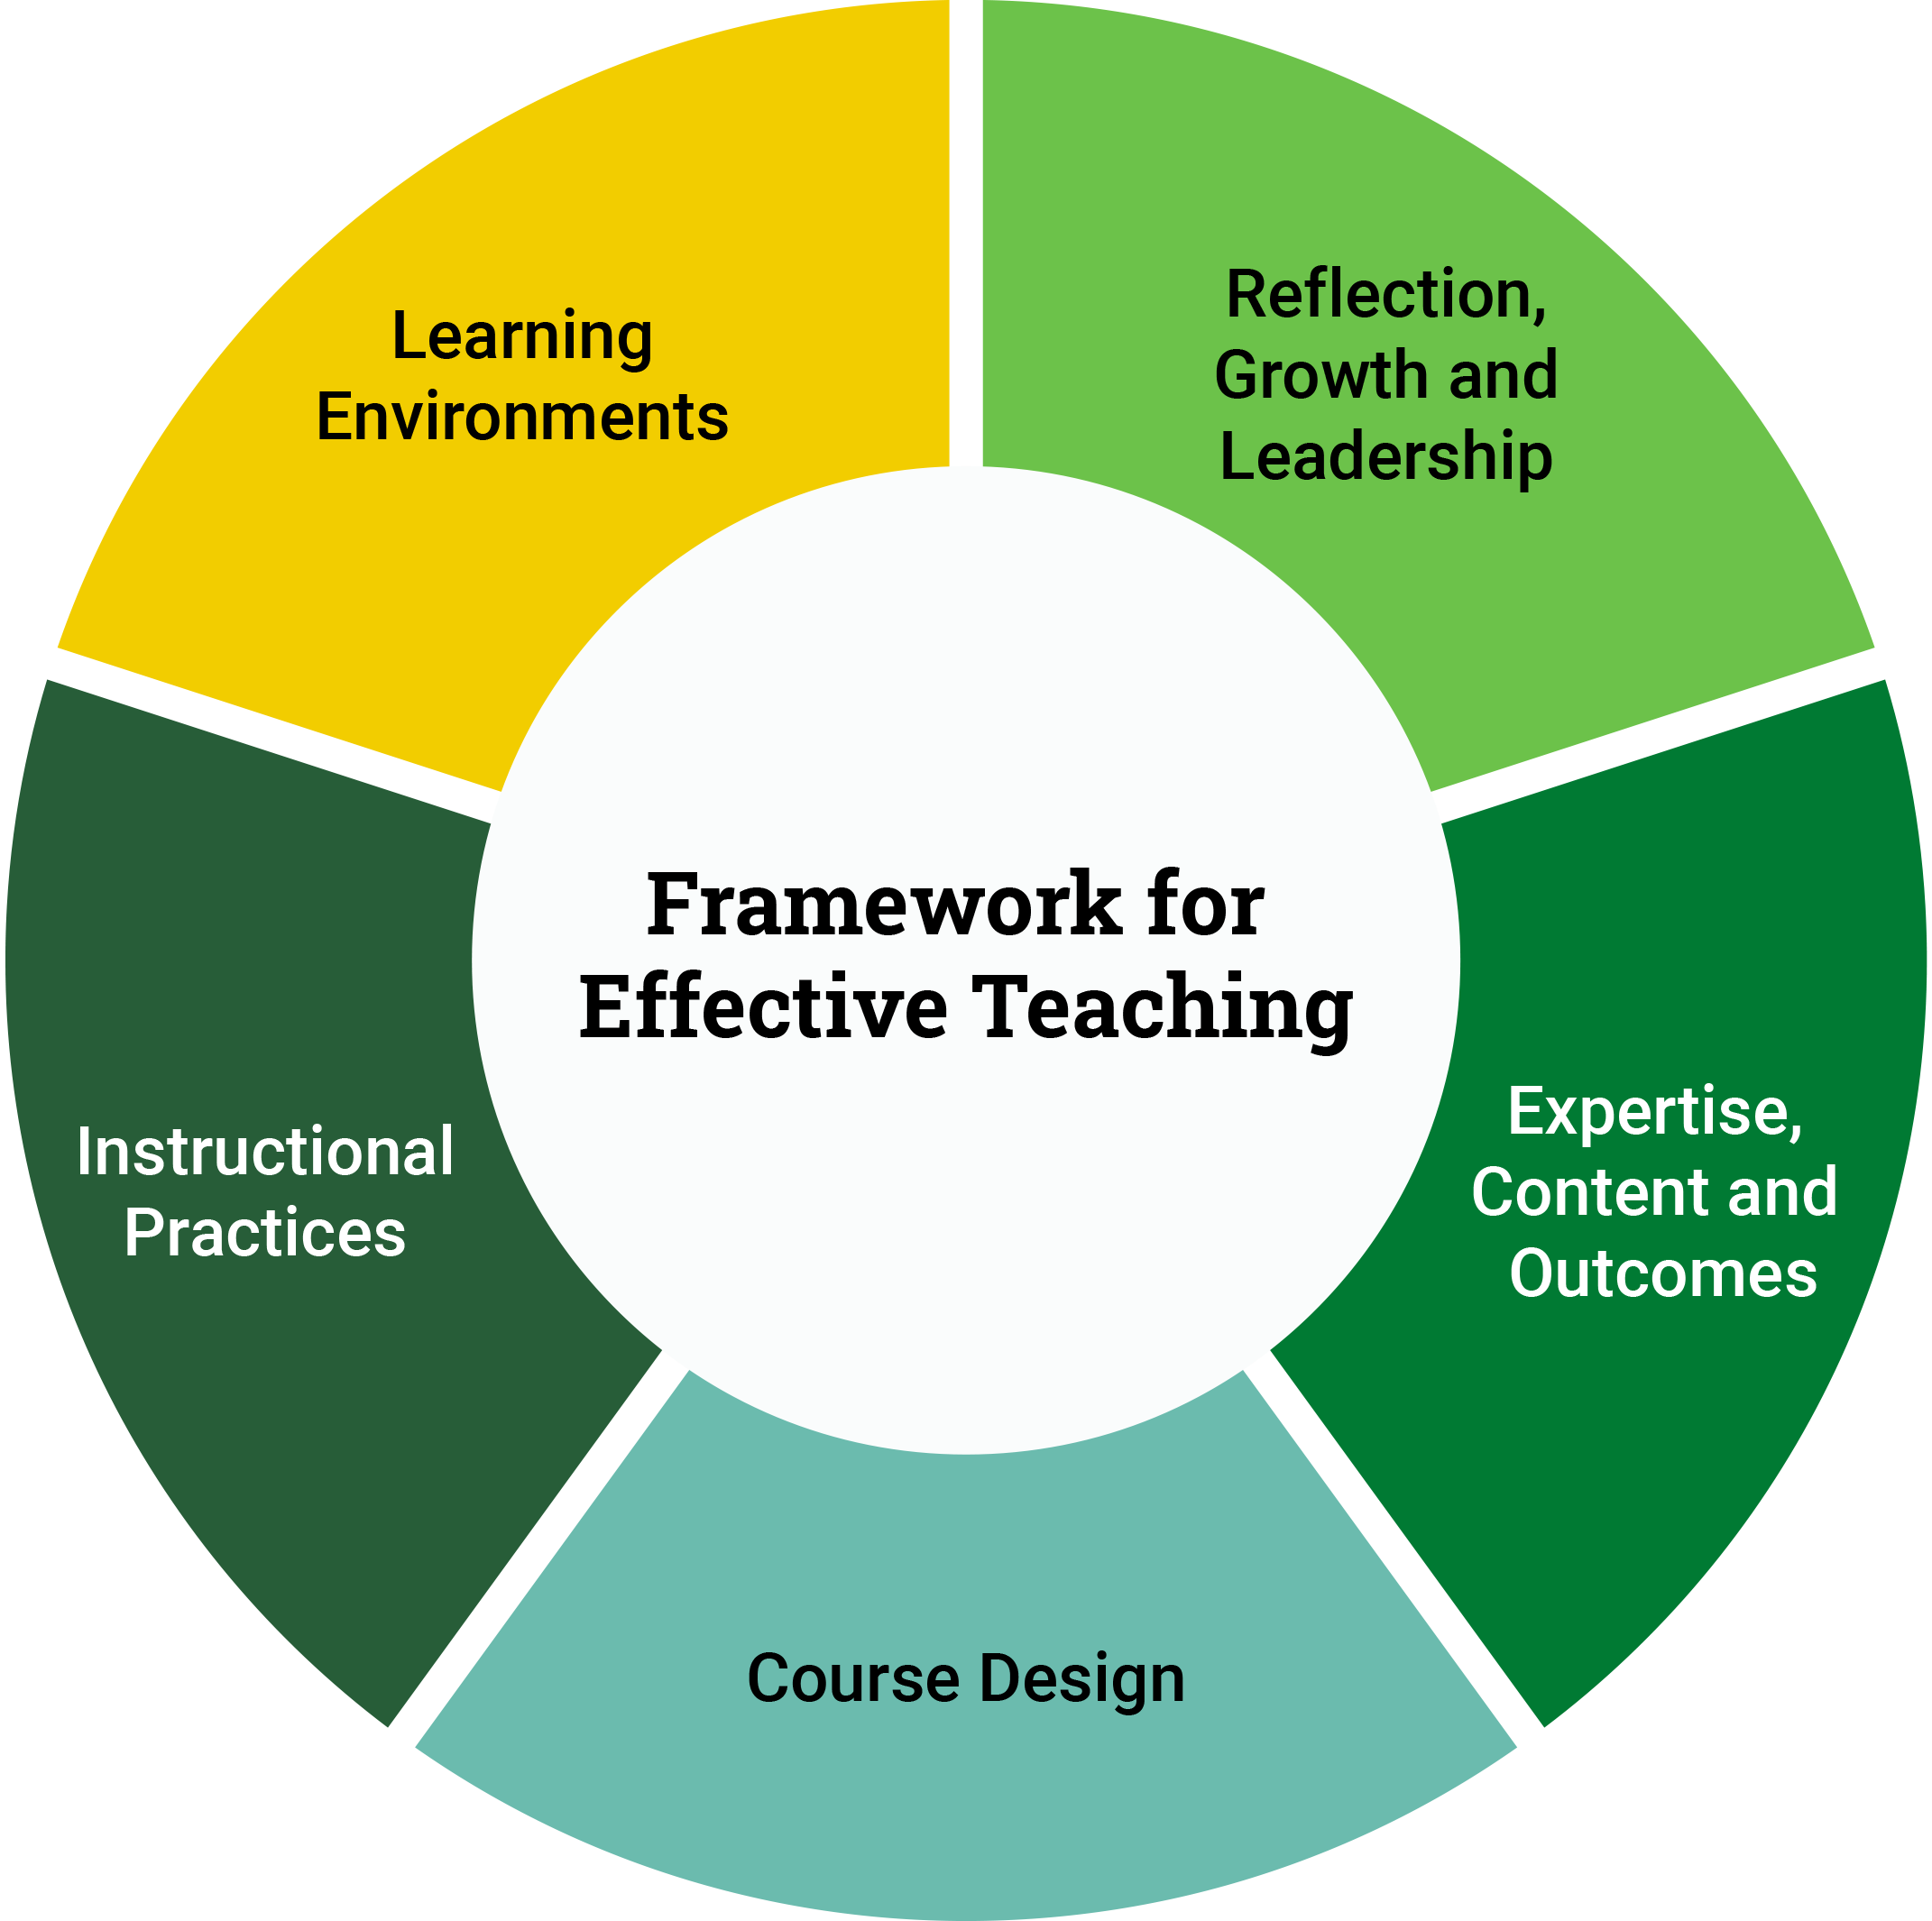 The Framework for Effective Teaching comprises five domains:  Expertise, Content, and Outcomes. Course Design. Instructional Practice. Learning Environments. Reflection, Growth, and Leadership.